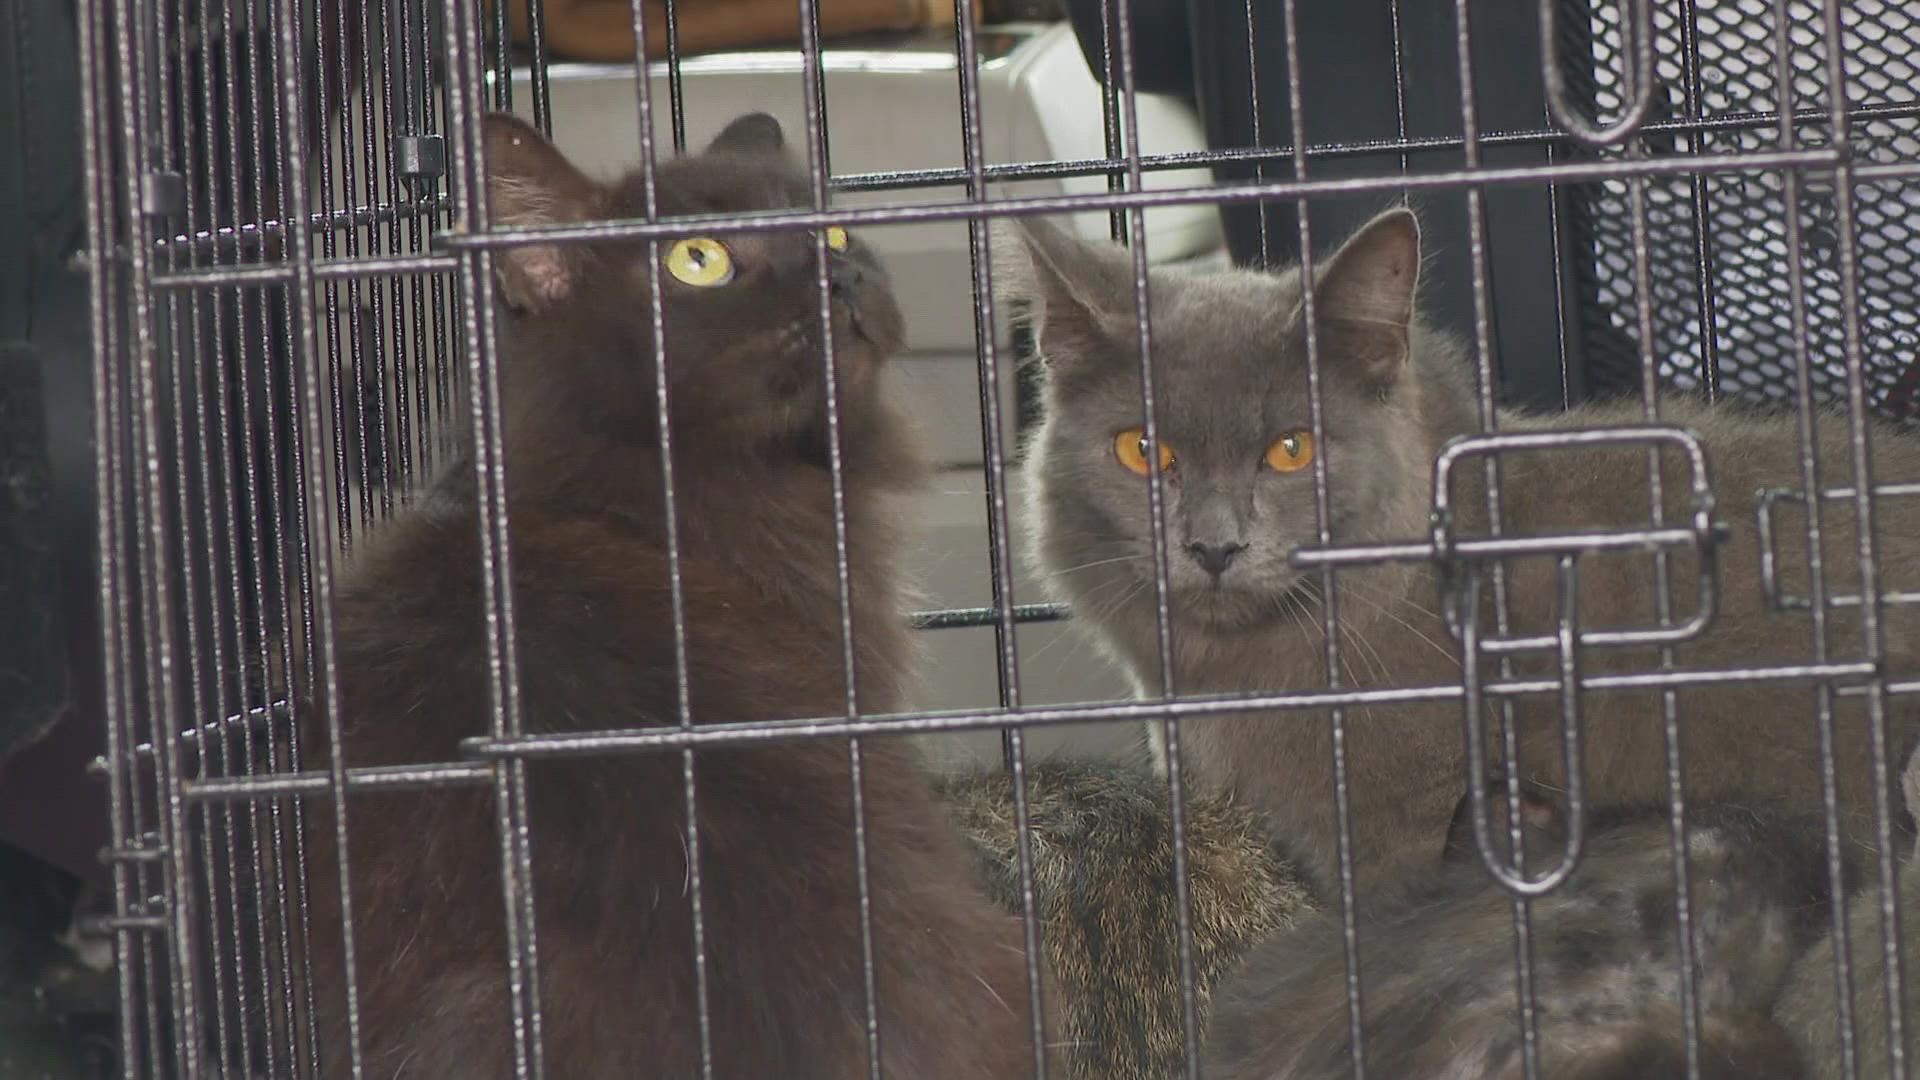 Non-profit animal rescue organizations are pleading the public for help with supplies, fosters and food to care for the cats in need.